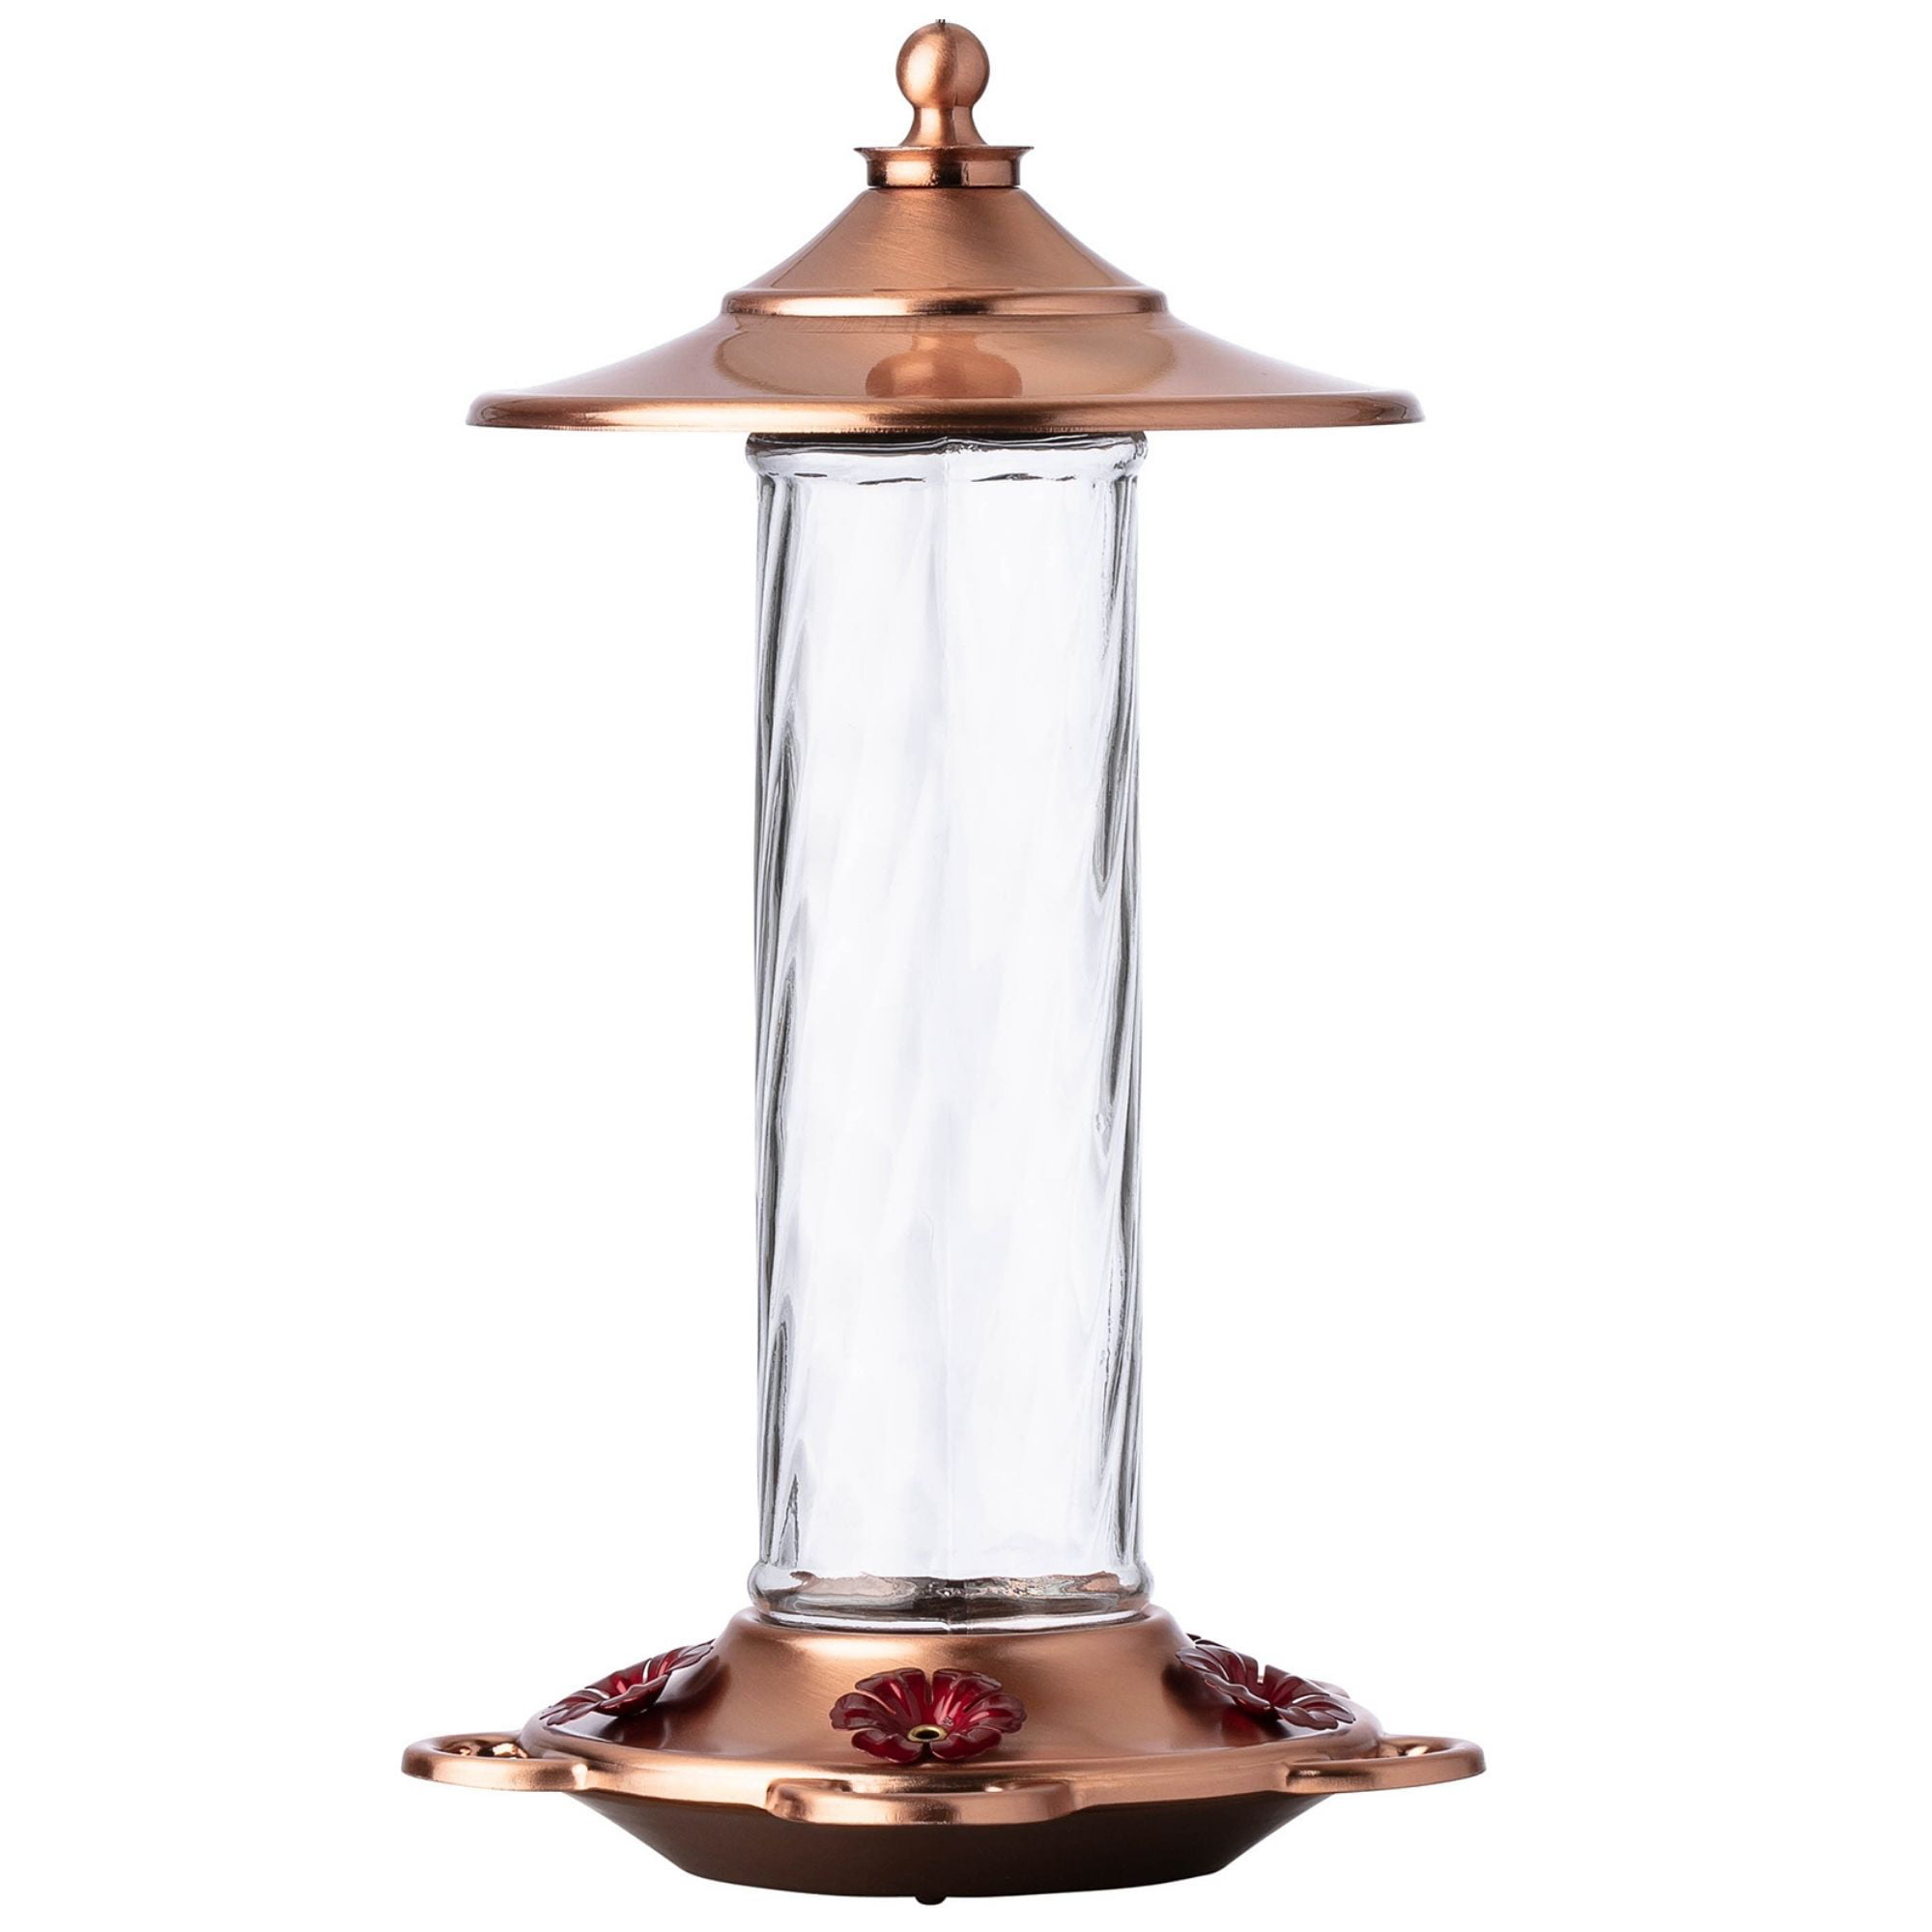 More Birds 33 Jubilee Humming Feeder Brushed Copper Finish 32 Oz Capacity 